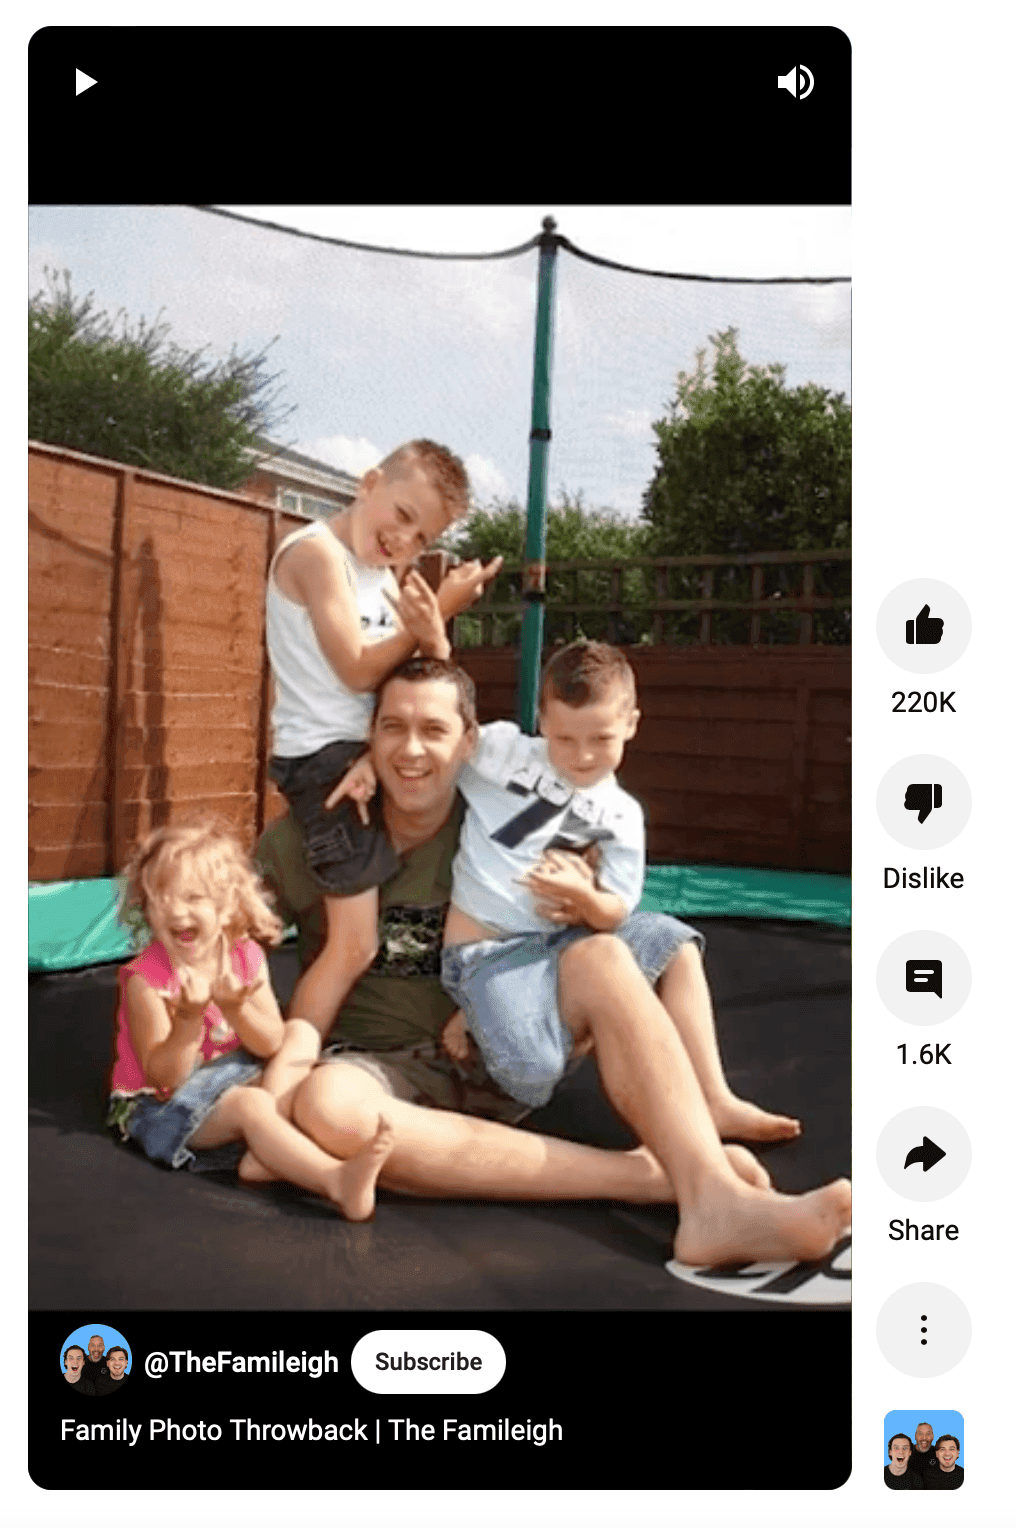 Family photo on a trampoline